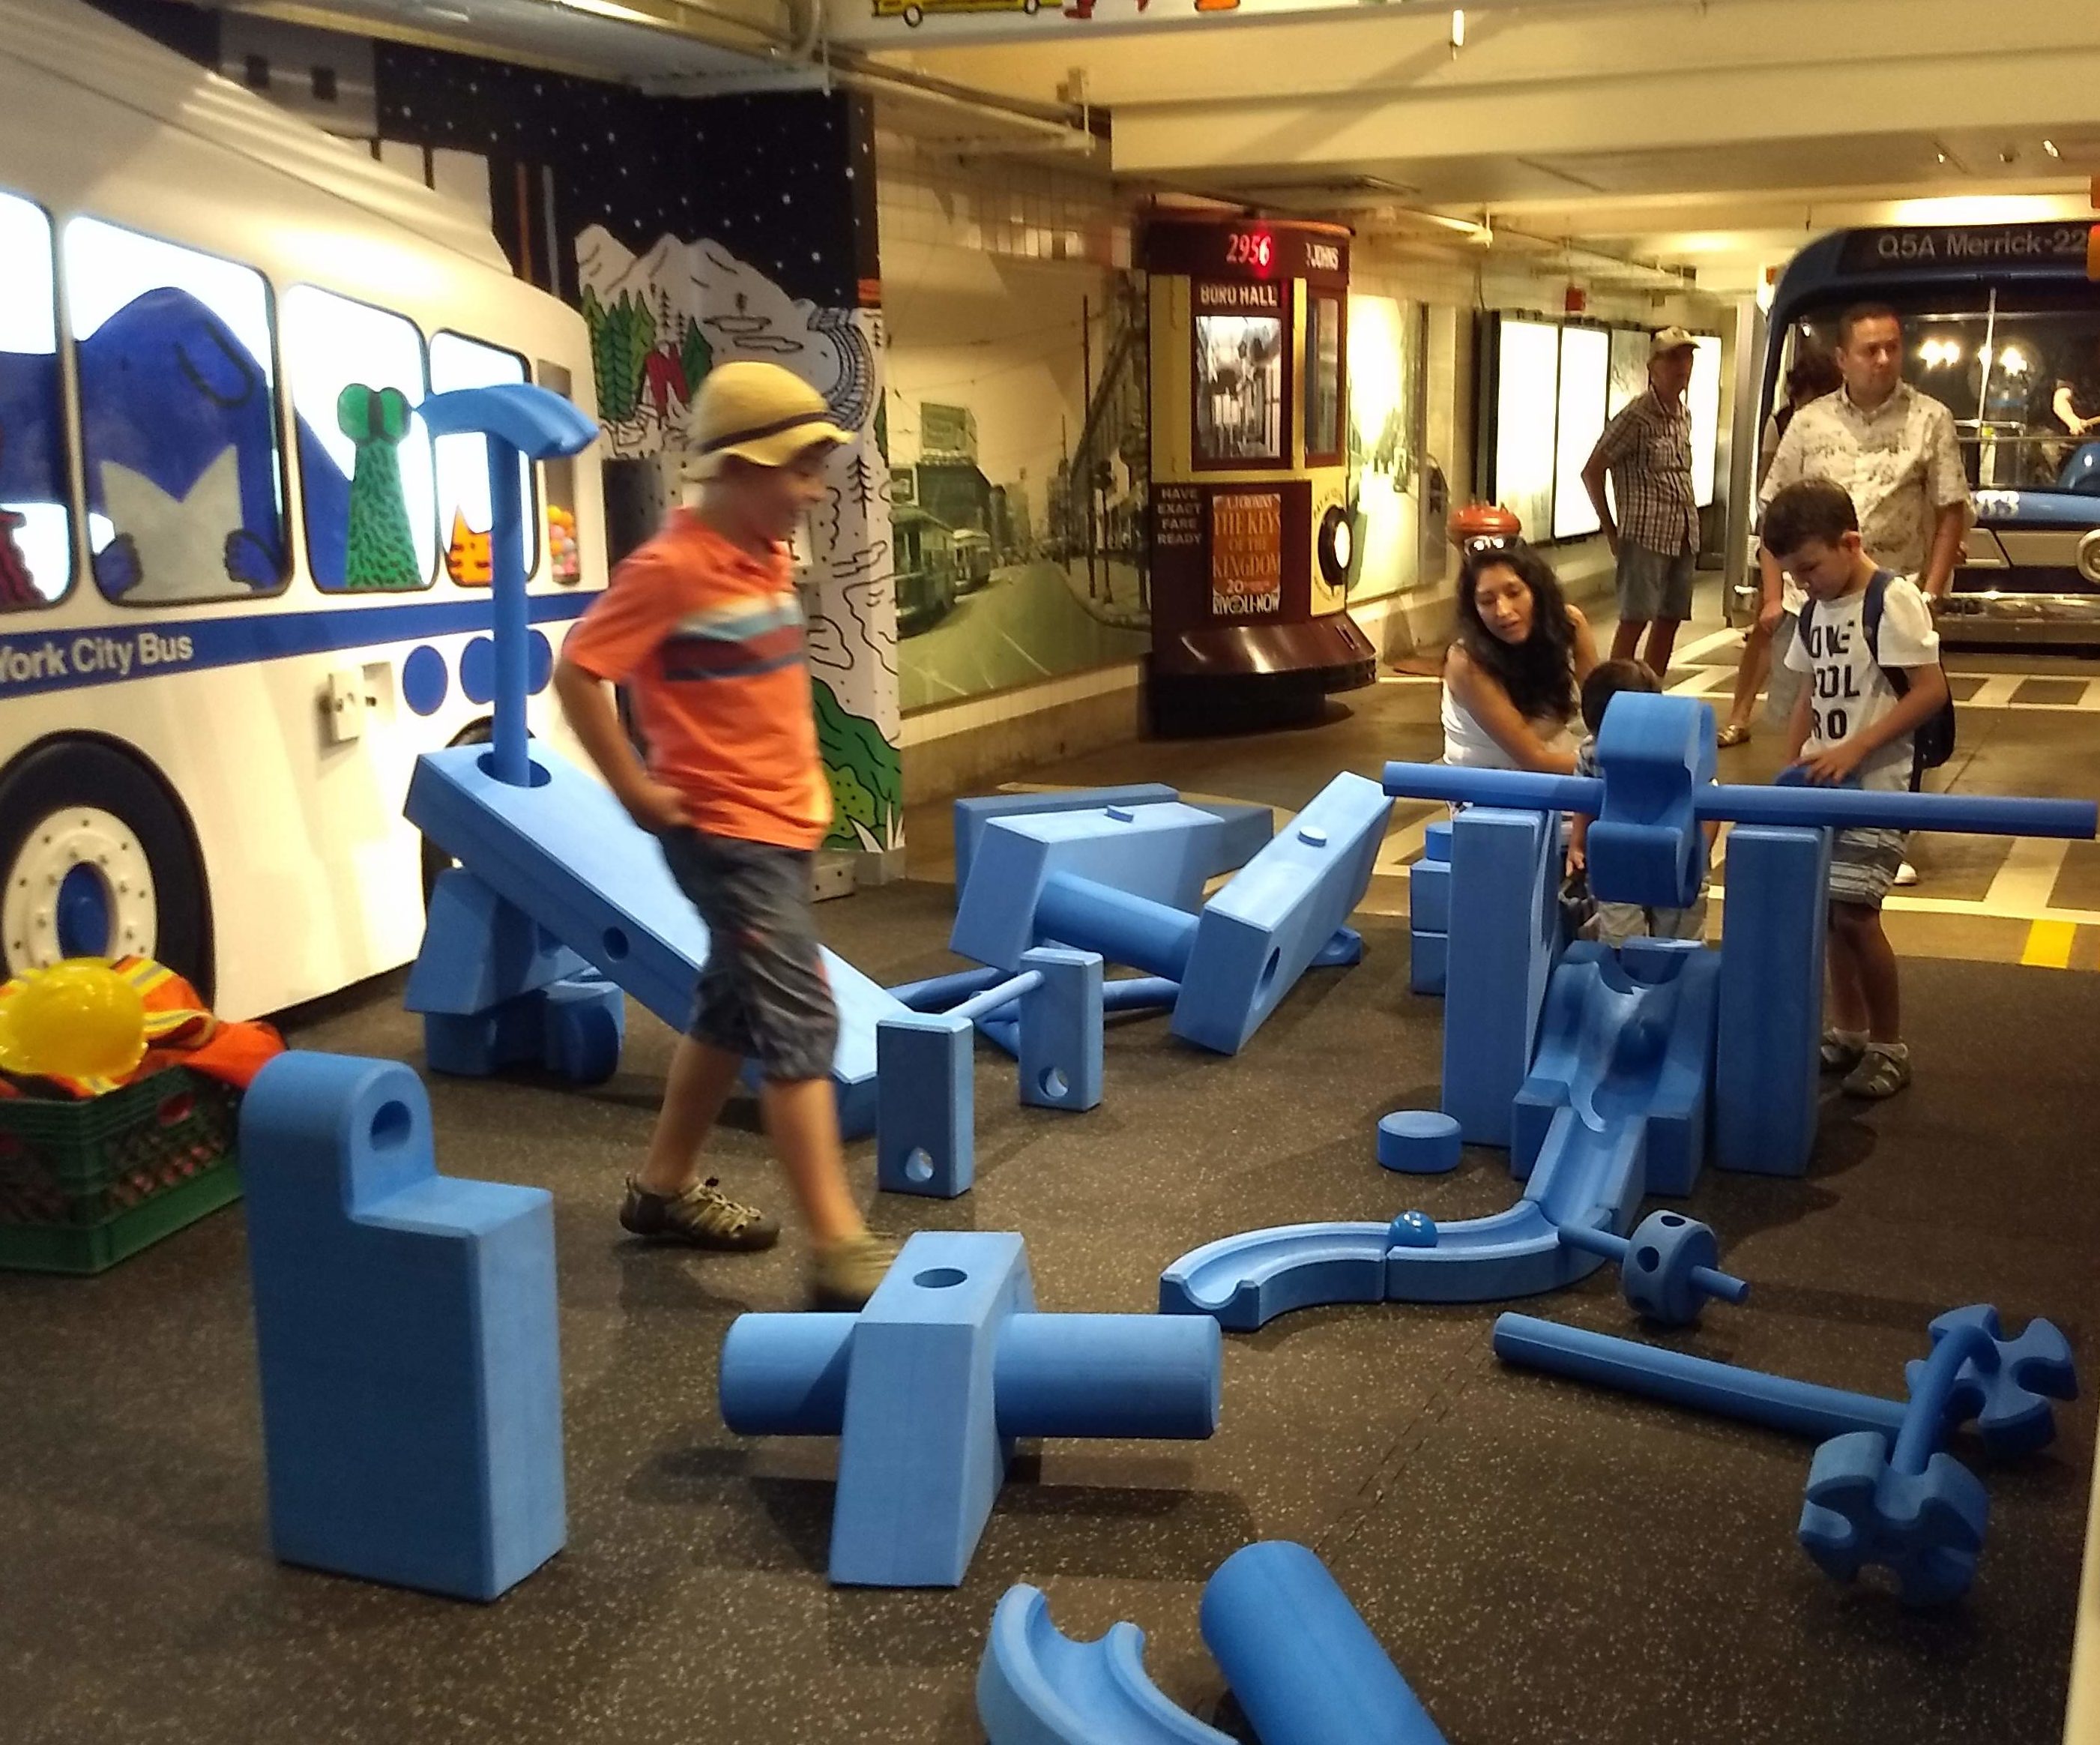 Children play with large blue blocks, building a large ramp for a ball together.